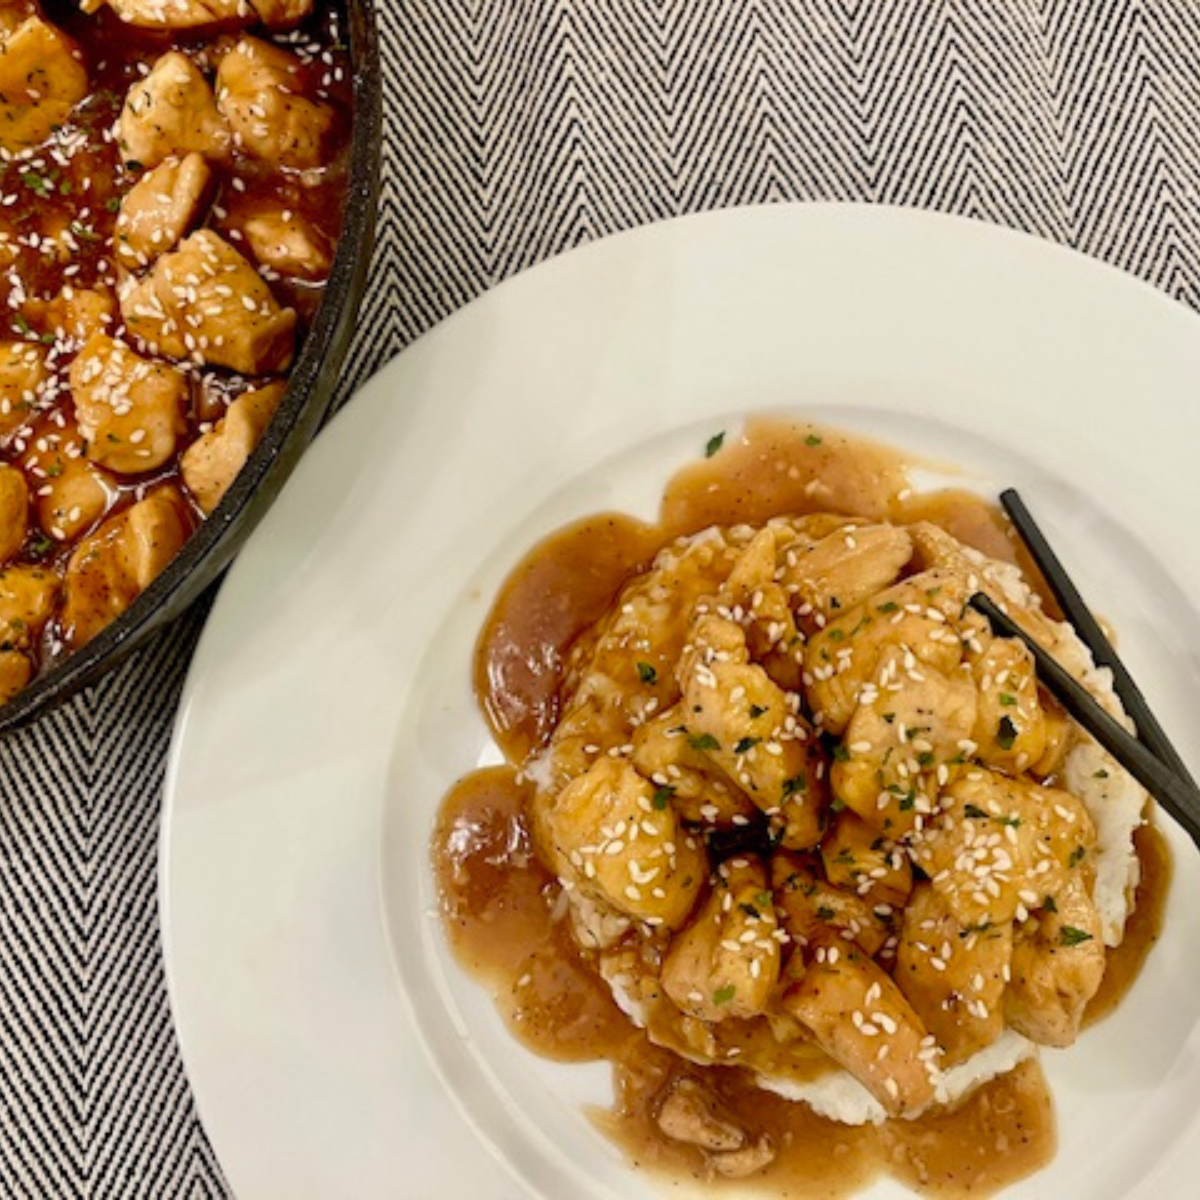 Overhead image of a plate of Bourbon Chicken with a skillet next to it